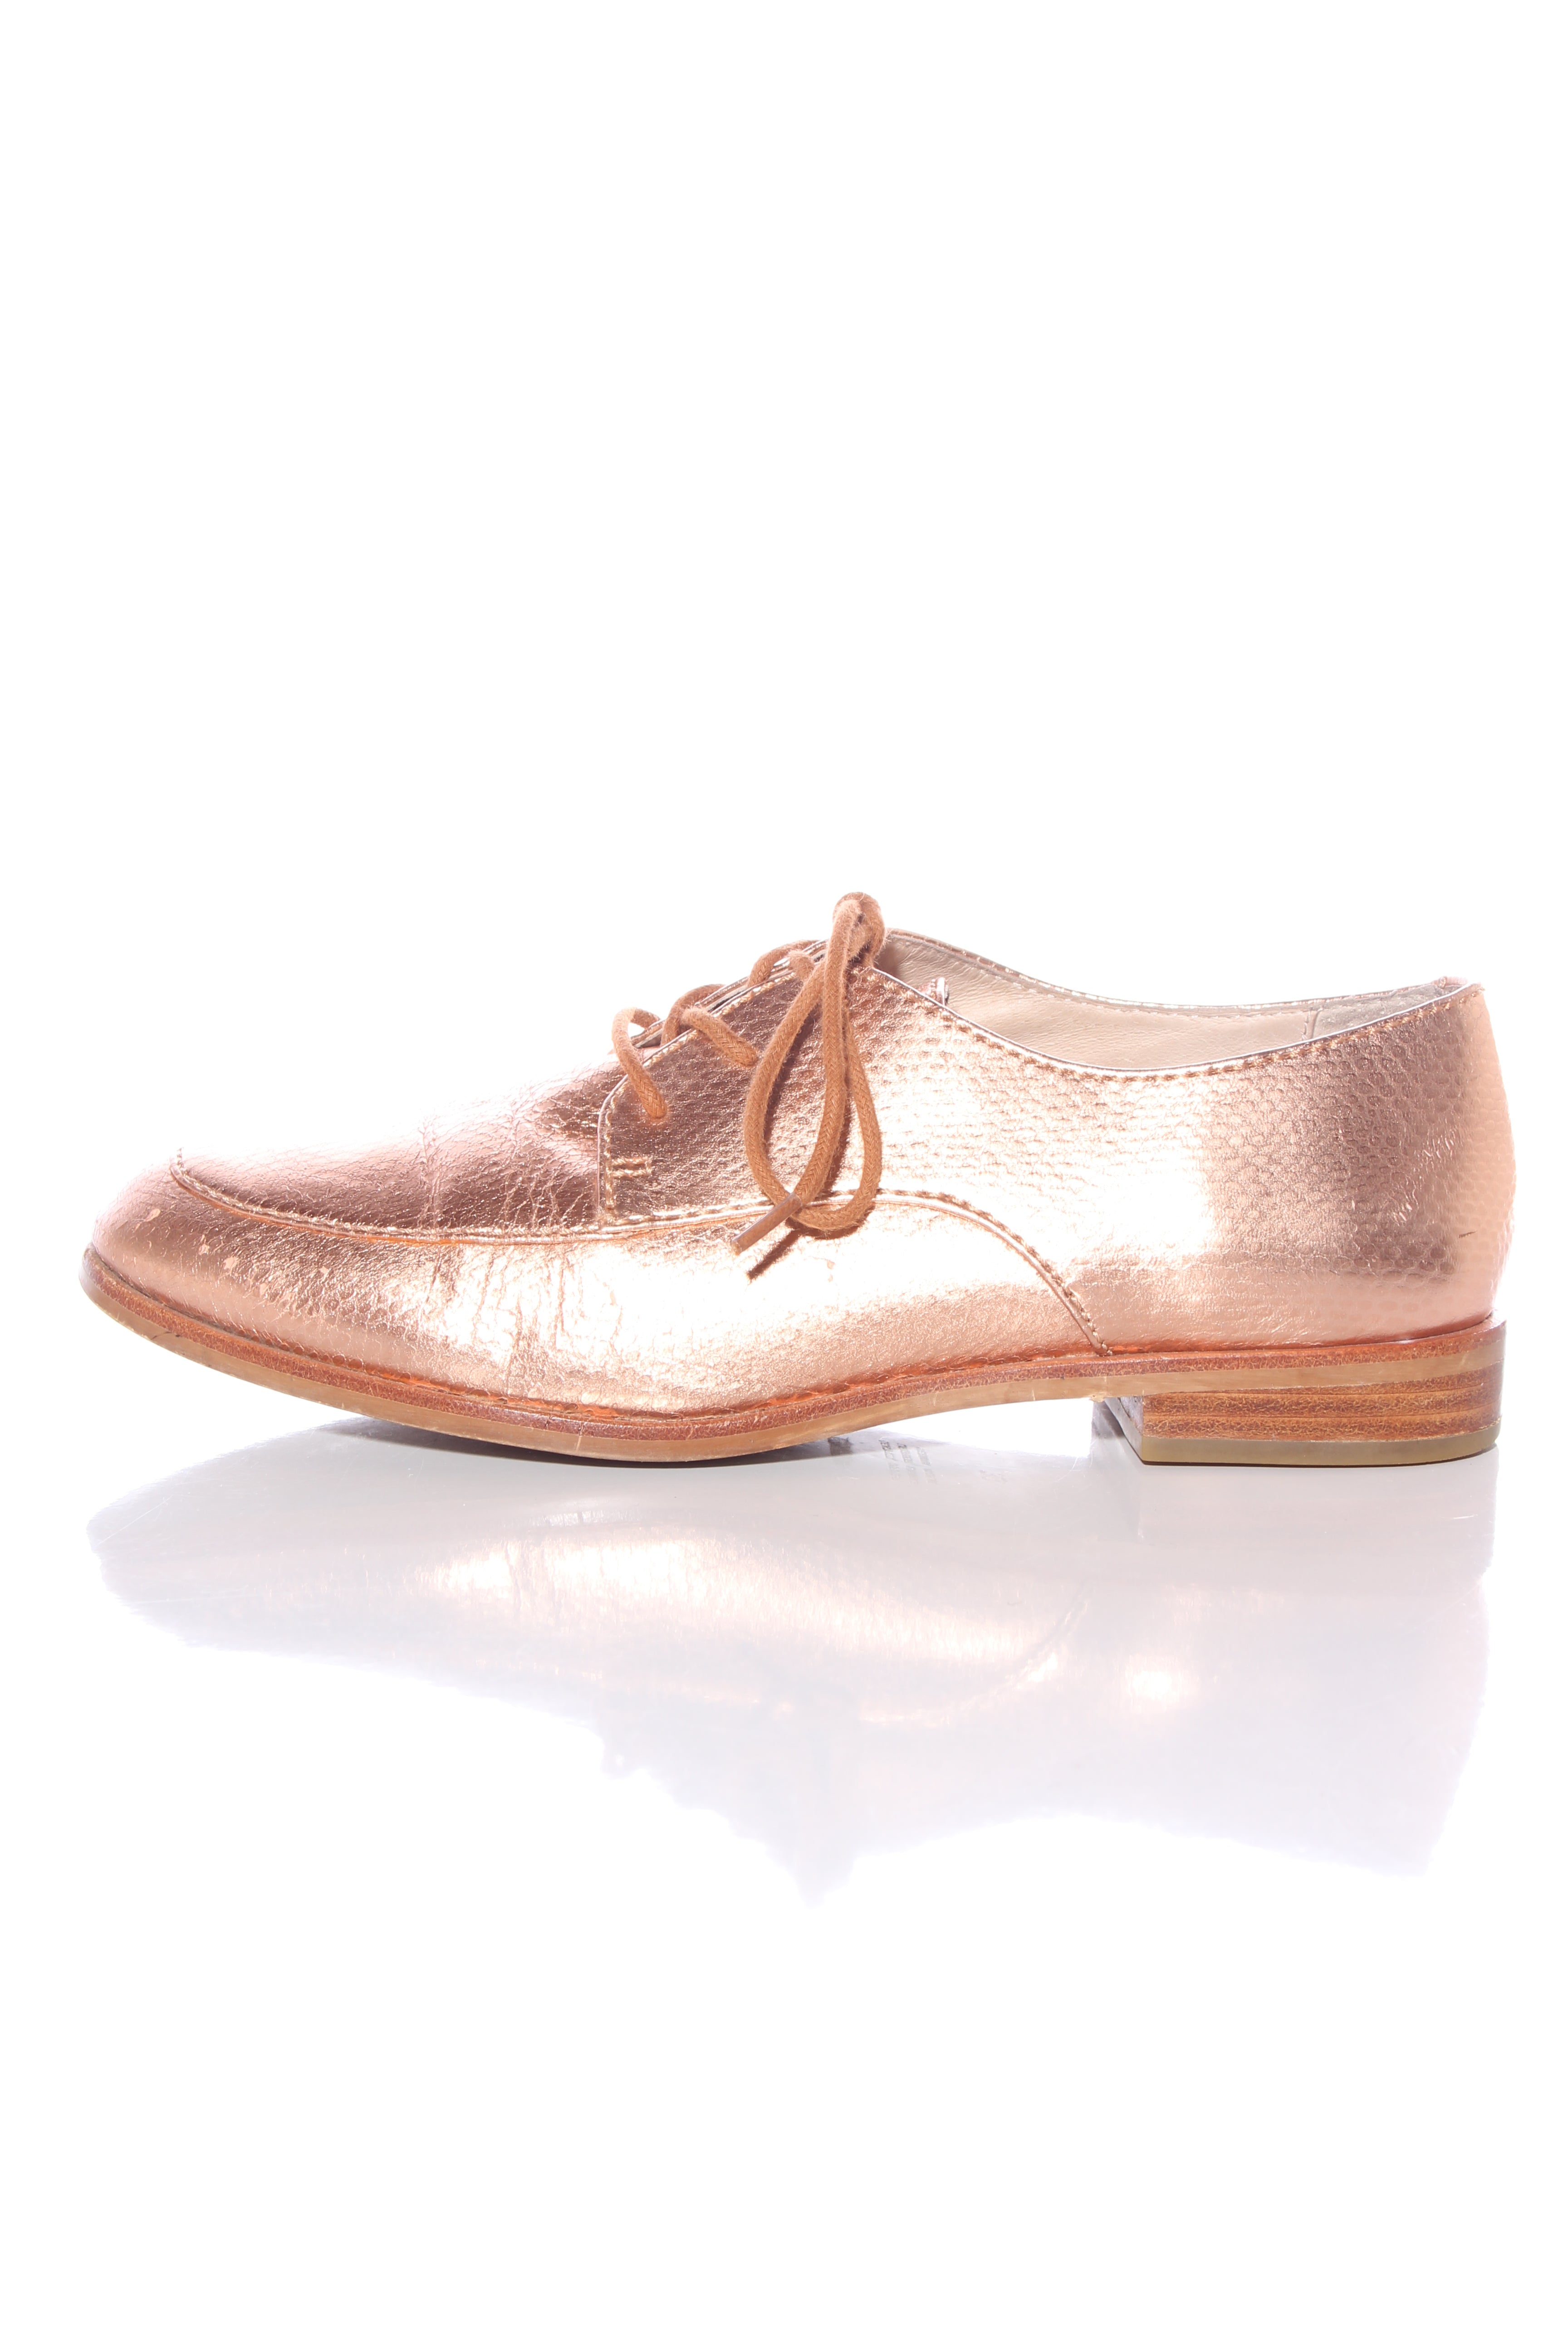 rose gold leather shoes